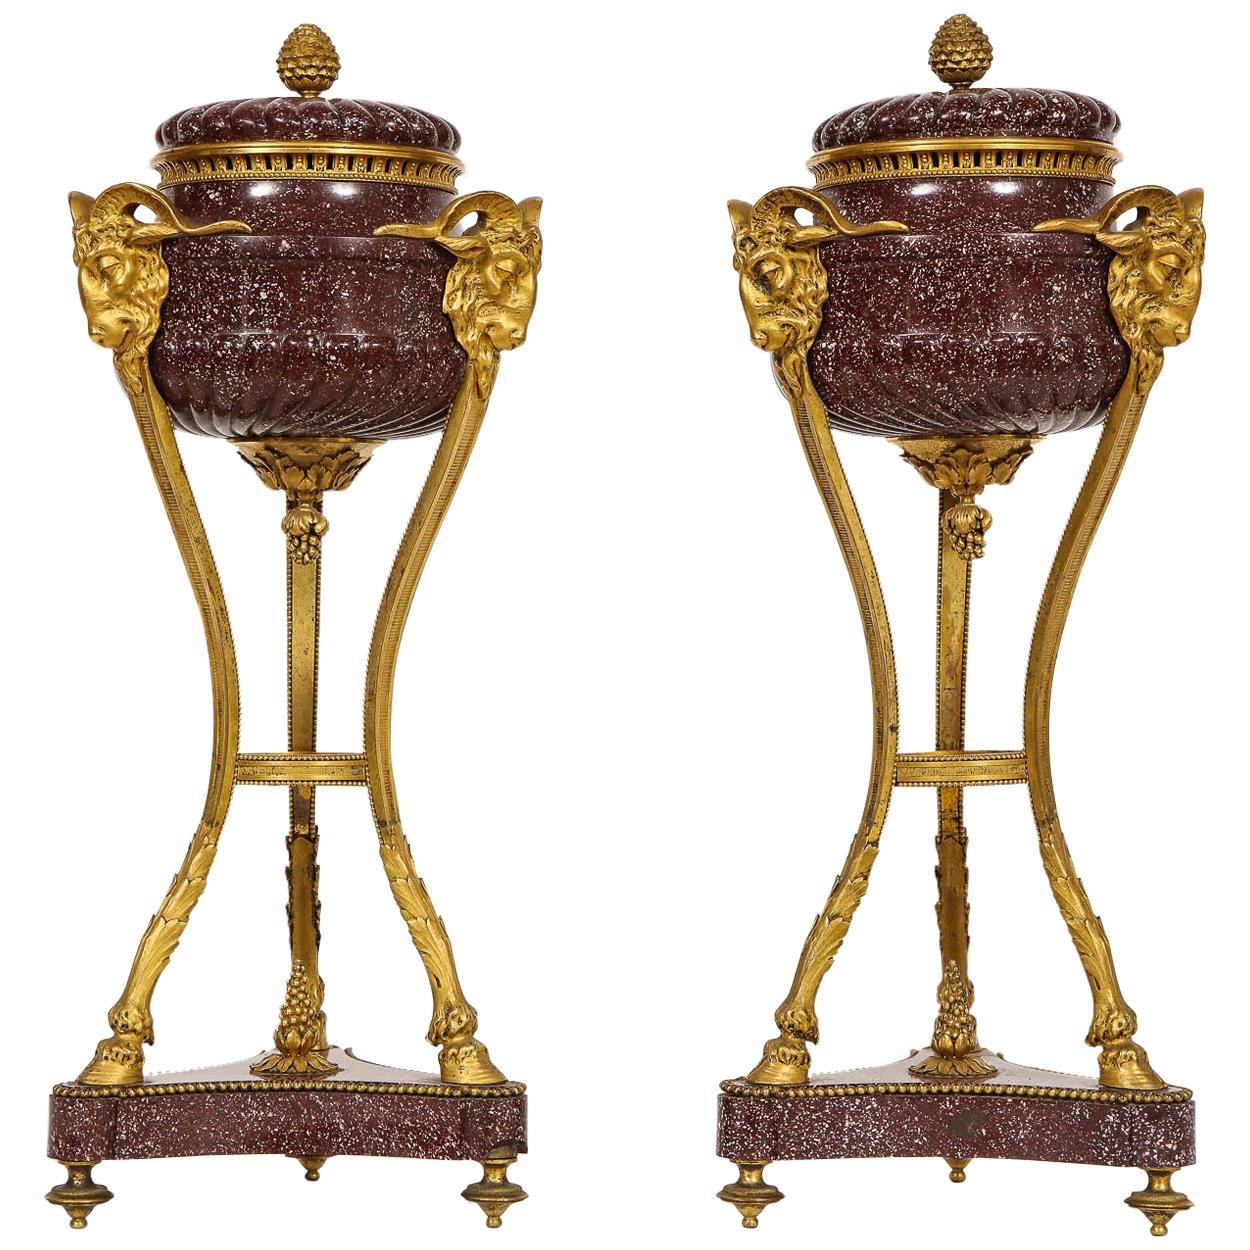 Pair of Egyptian Porphyry Ormolu-Mounted Brule Parfumes after Gouthiere